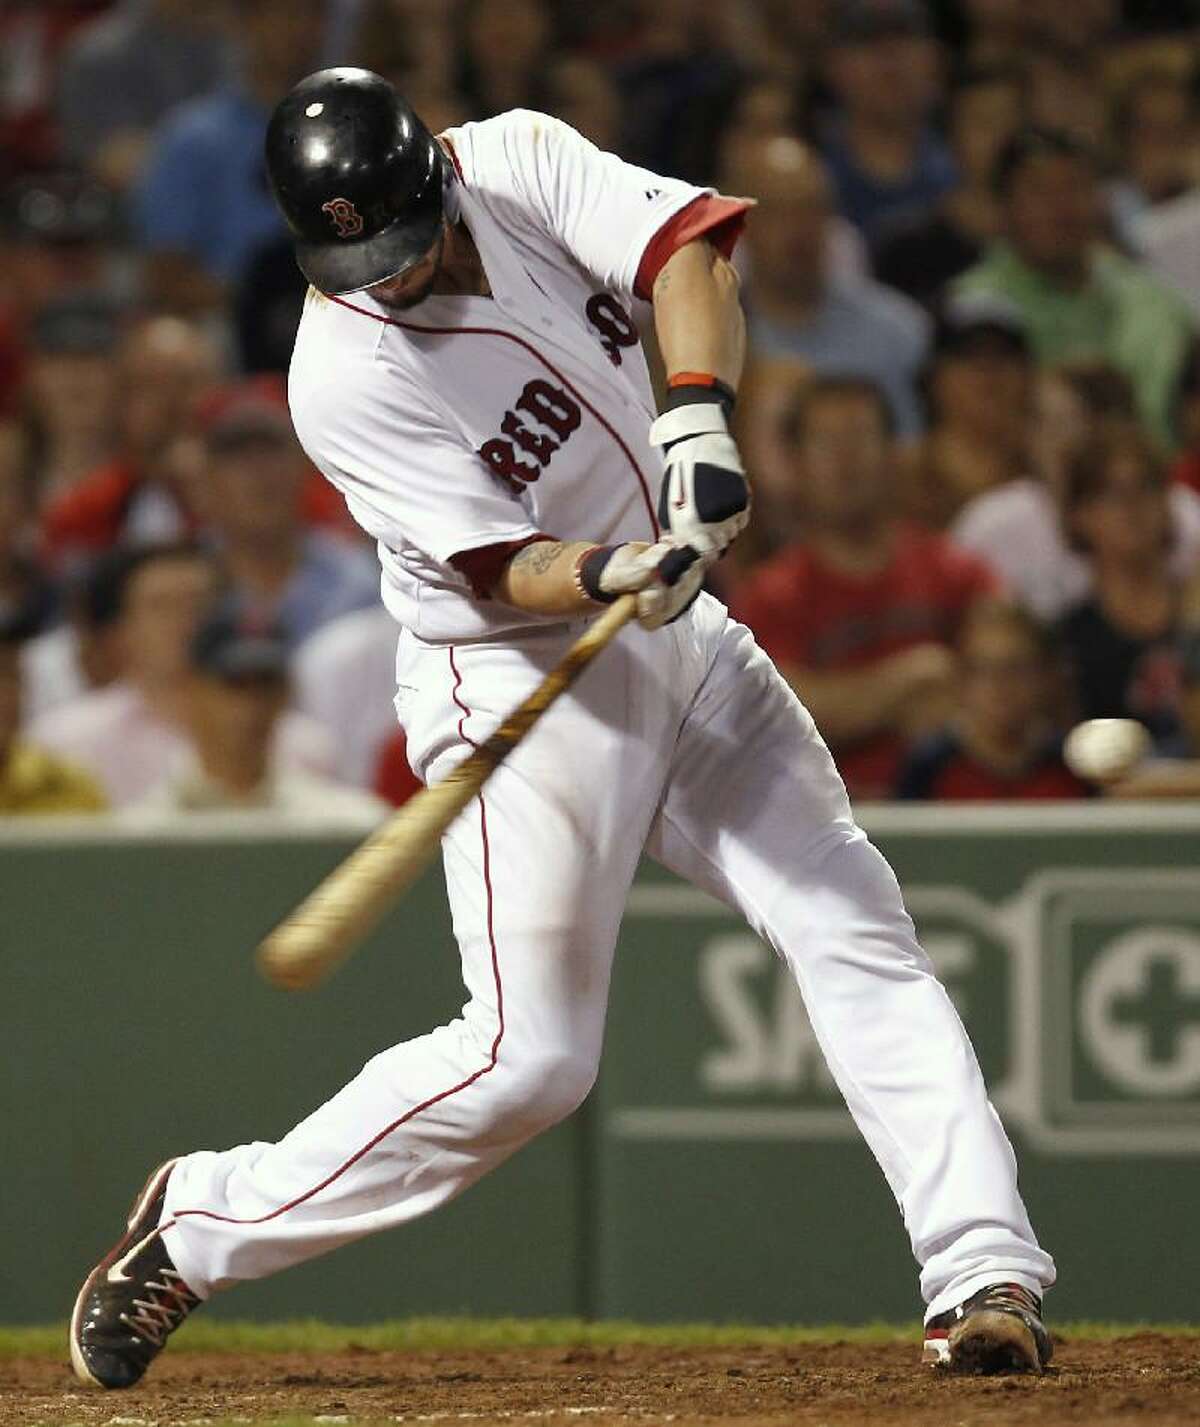 ASSOCIATED PRESS Boston Red Sox catcher Jarrod Saltalamacchia hits a home run, the third in a row for the Red Sox during the seventh inning of Thursday's game against the Baltimore Orioles at Fenway Park in Boston.